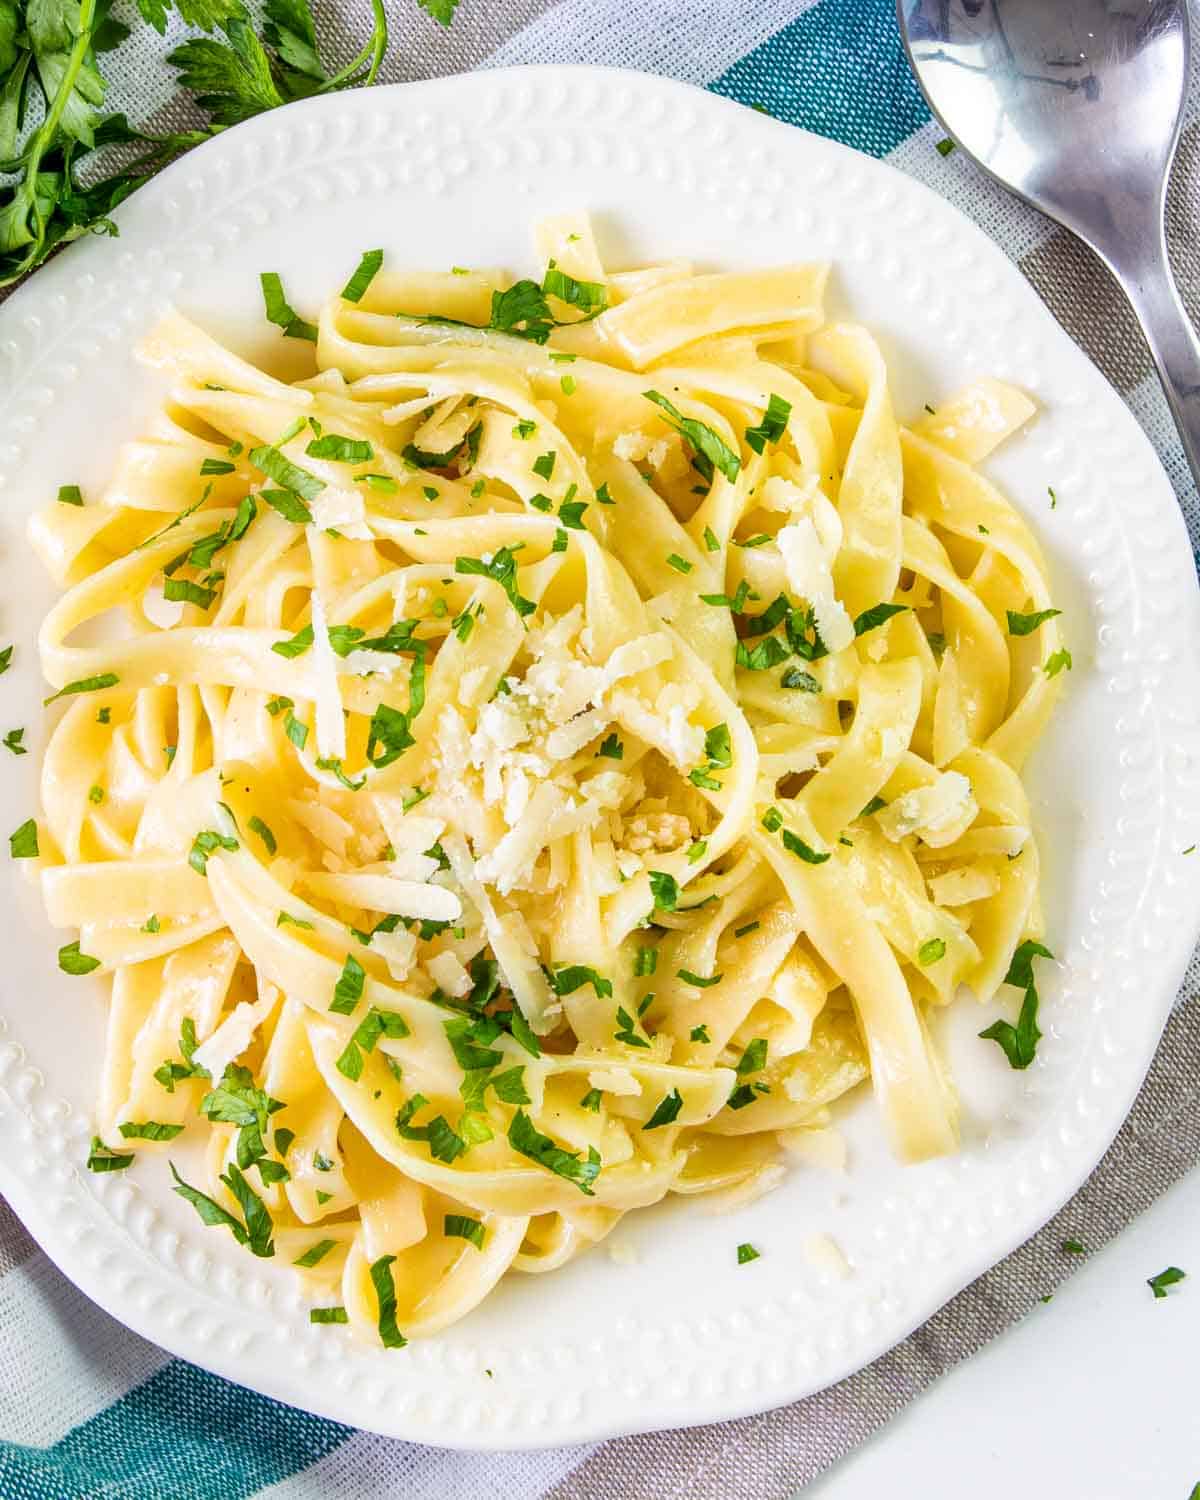 buttered noodles garnished with parsley on a white plate.